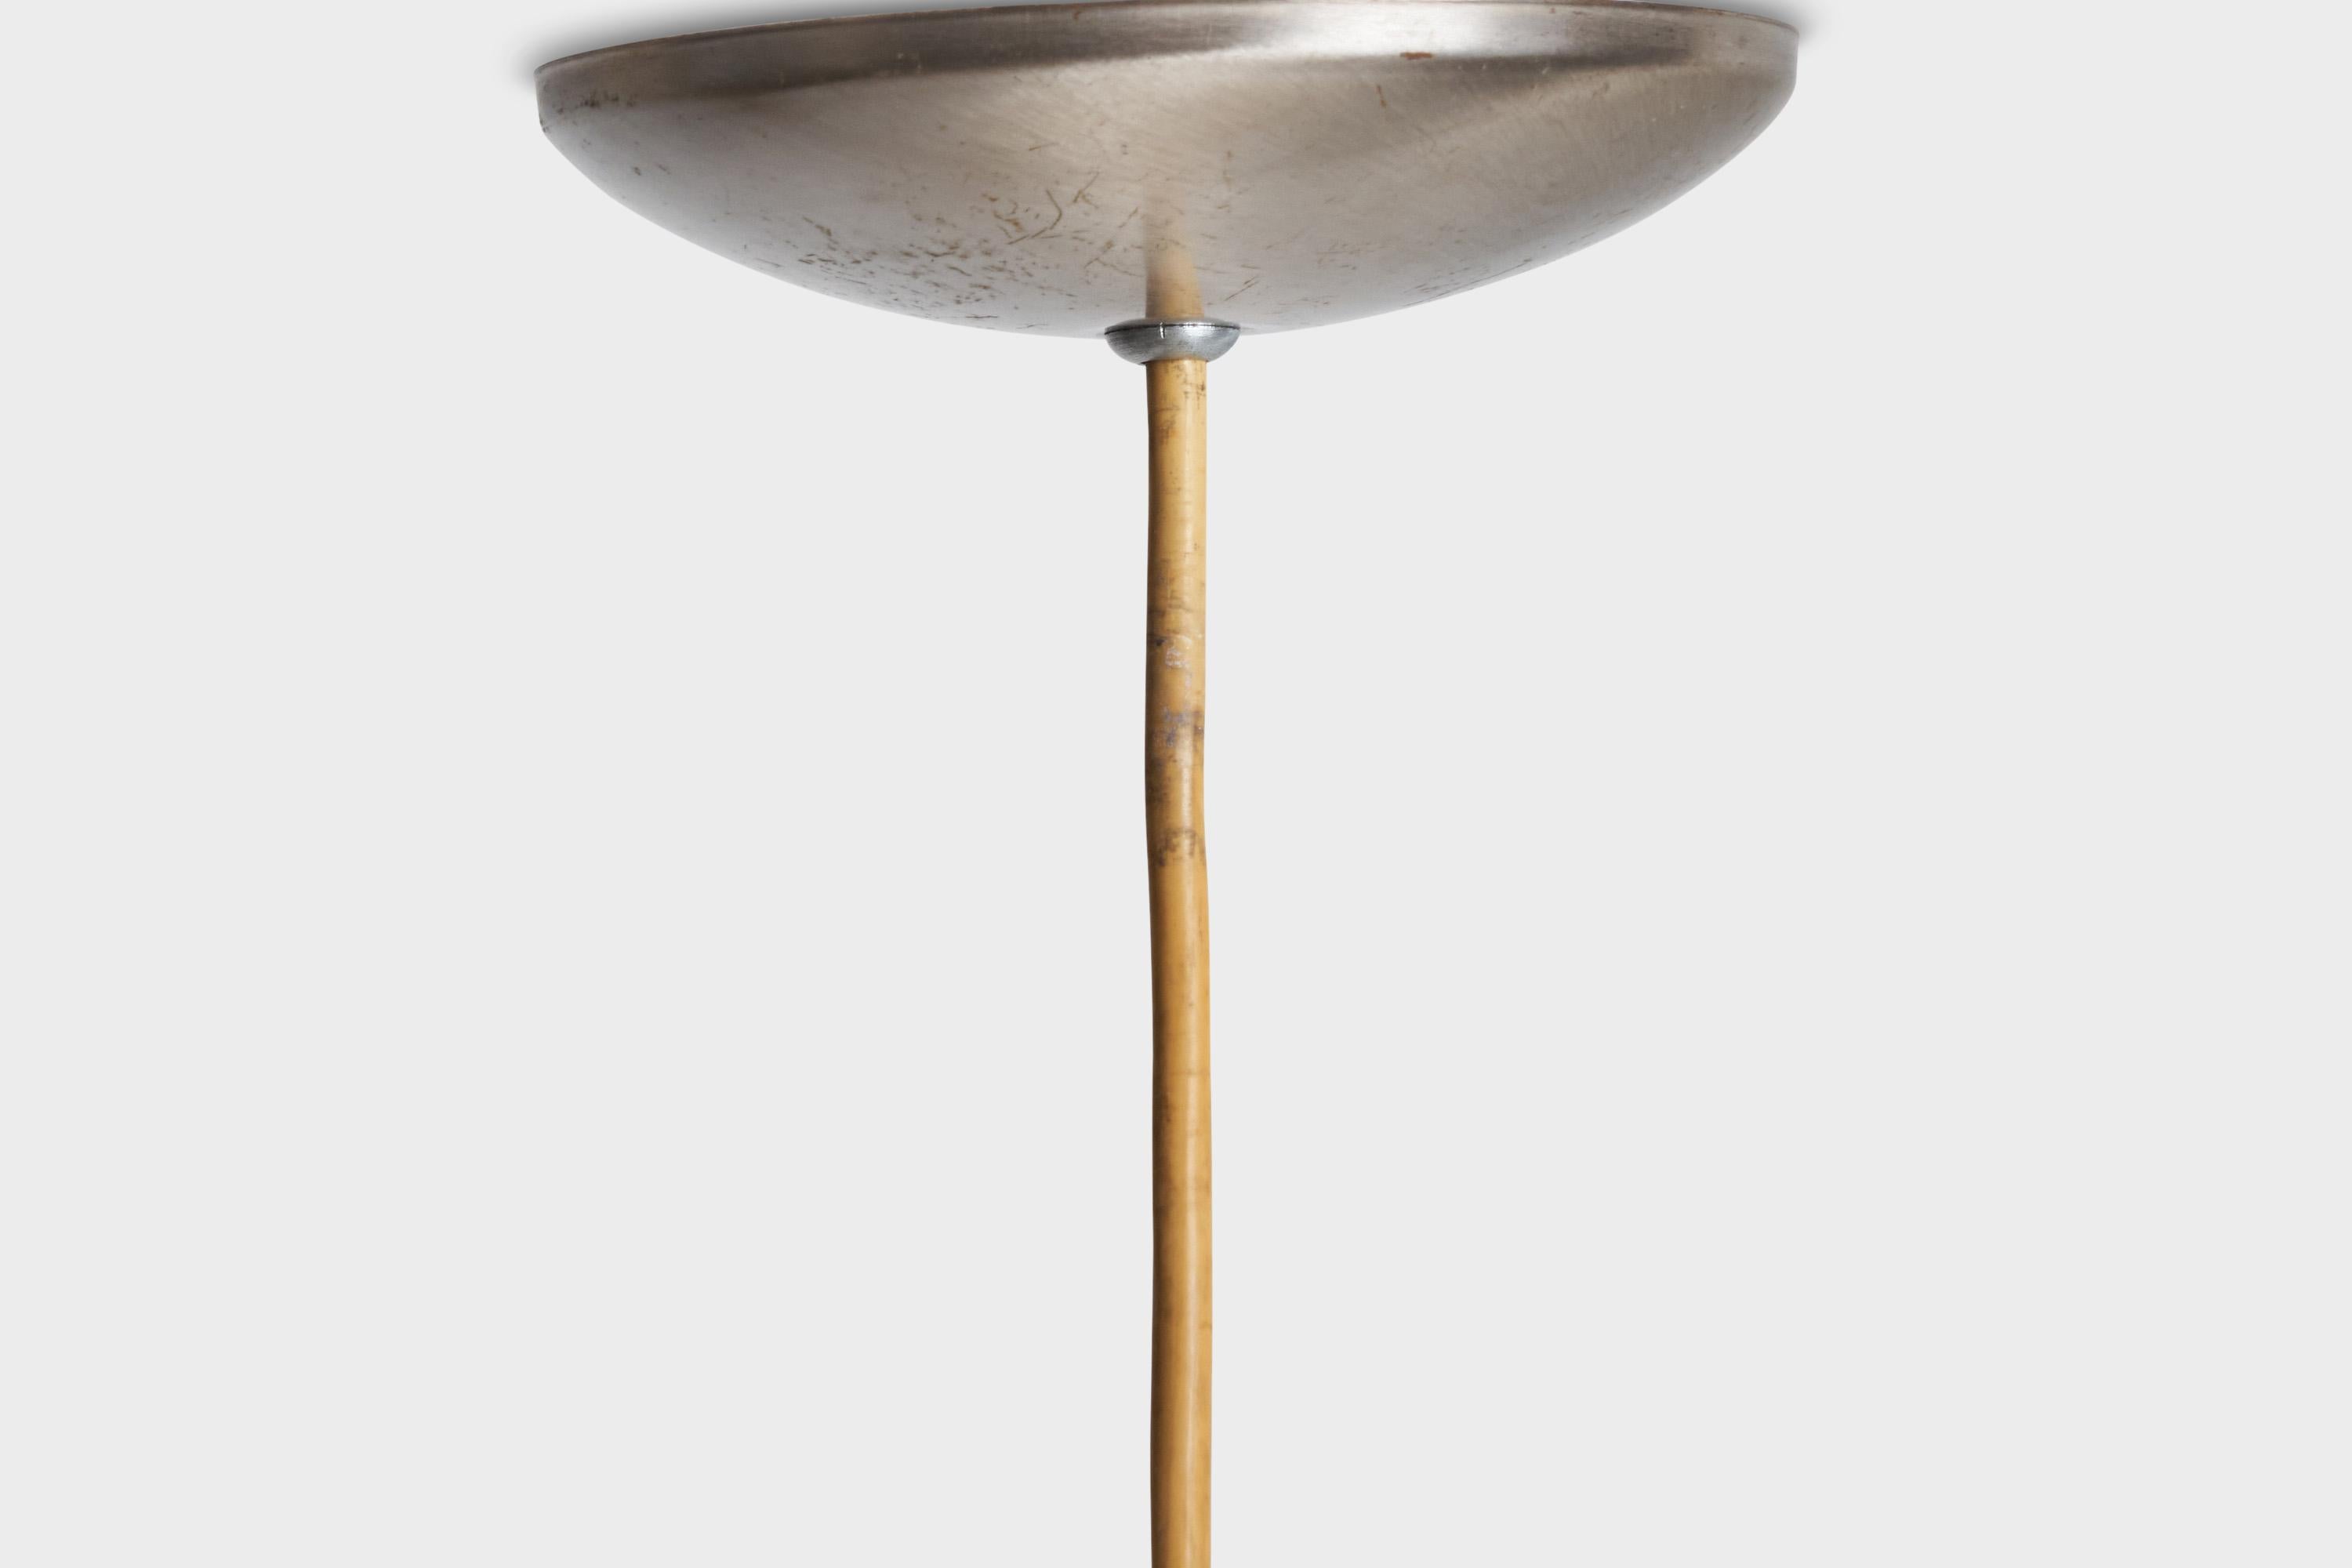 Mid-20th Century George Nelson, Saucer Bubble Pendant, Steel, Plastic, USA, 1952 For Sale